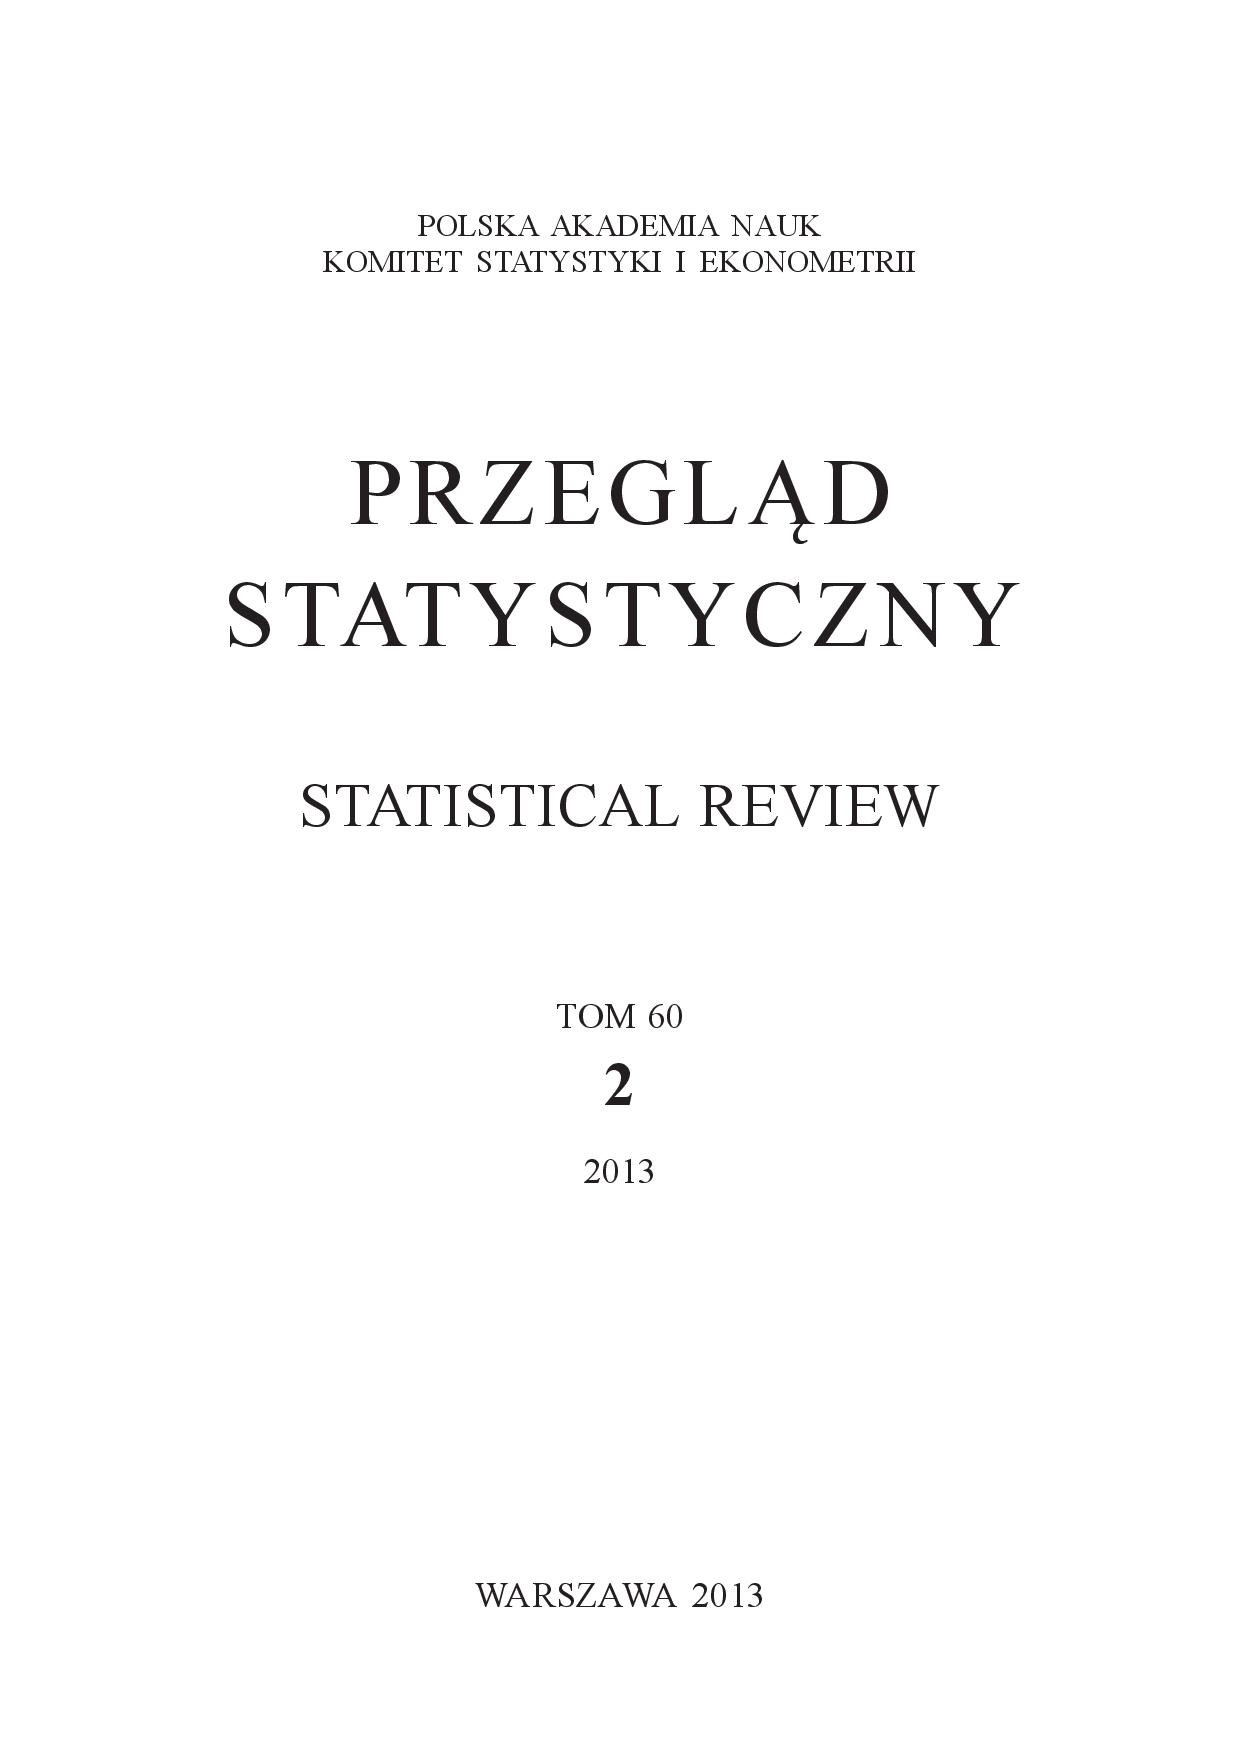 Macroeconomic Model of Crime and of the Law Enforcement System for Poland. Structure and Properties in the Light of Multiplier Analysis Cover Image